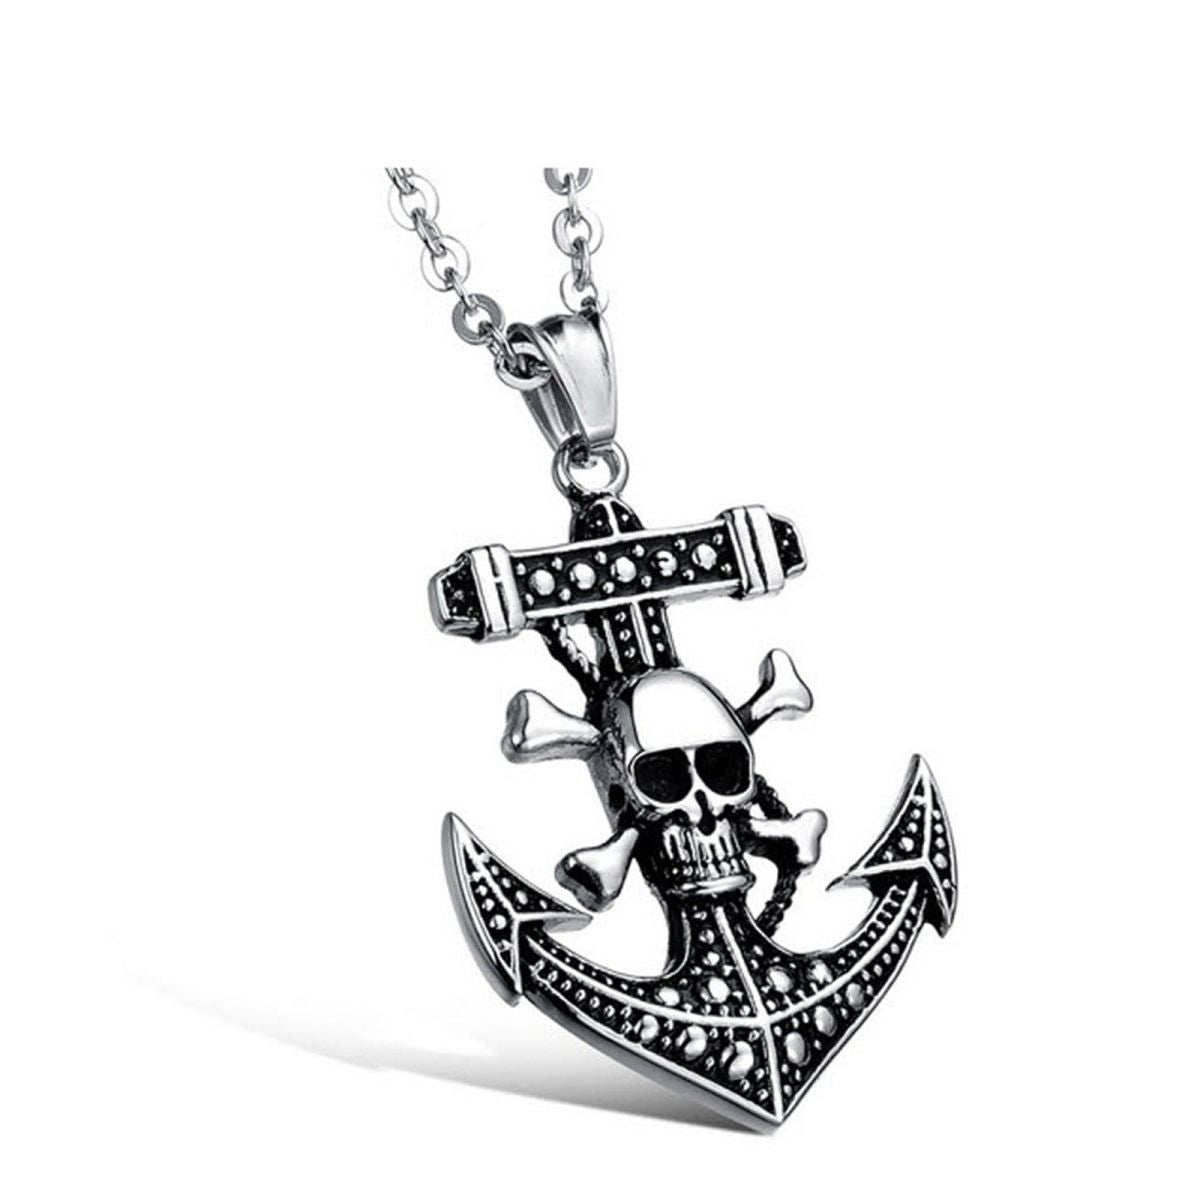 Vintage Marine Anchor Skull Pirate 316L Stainless Steel Pendant Chain